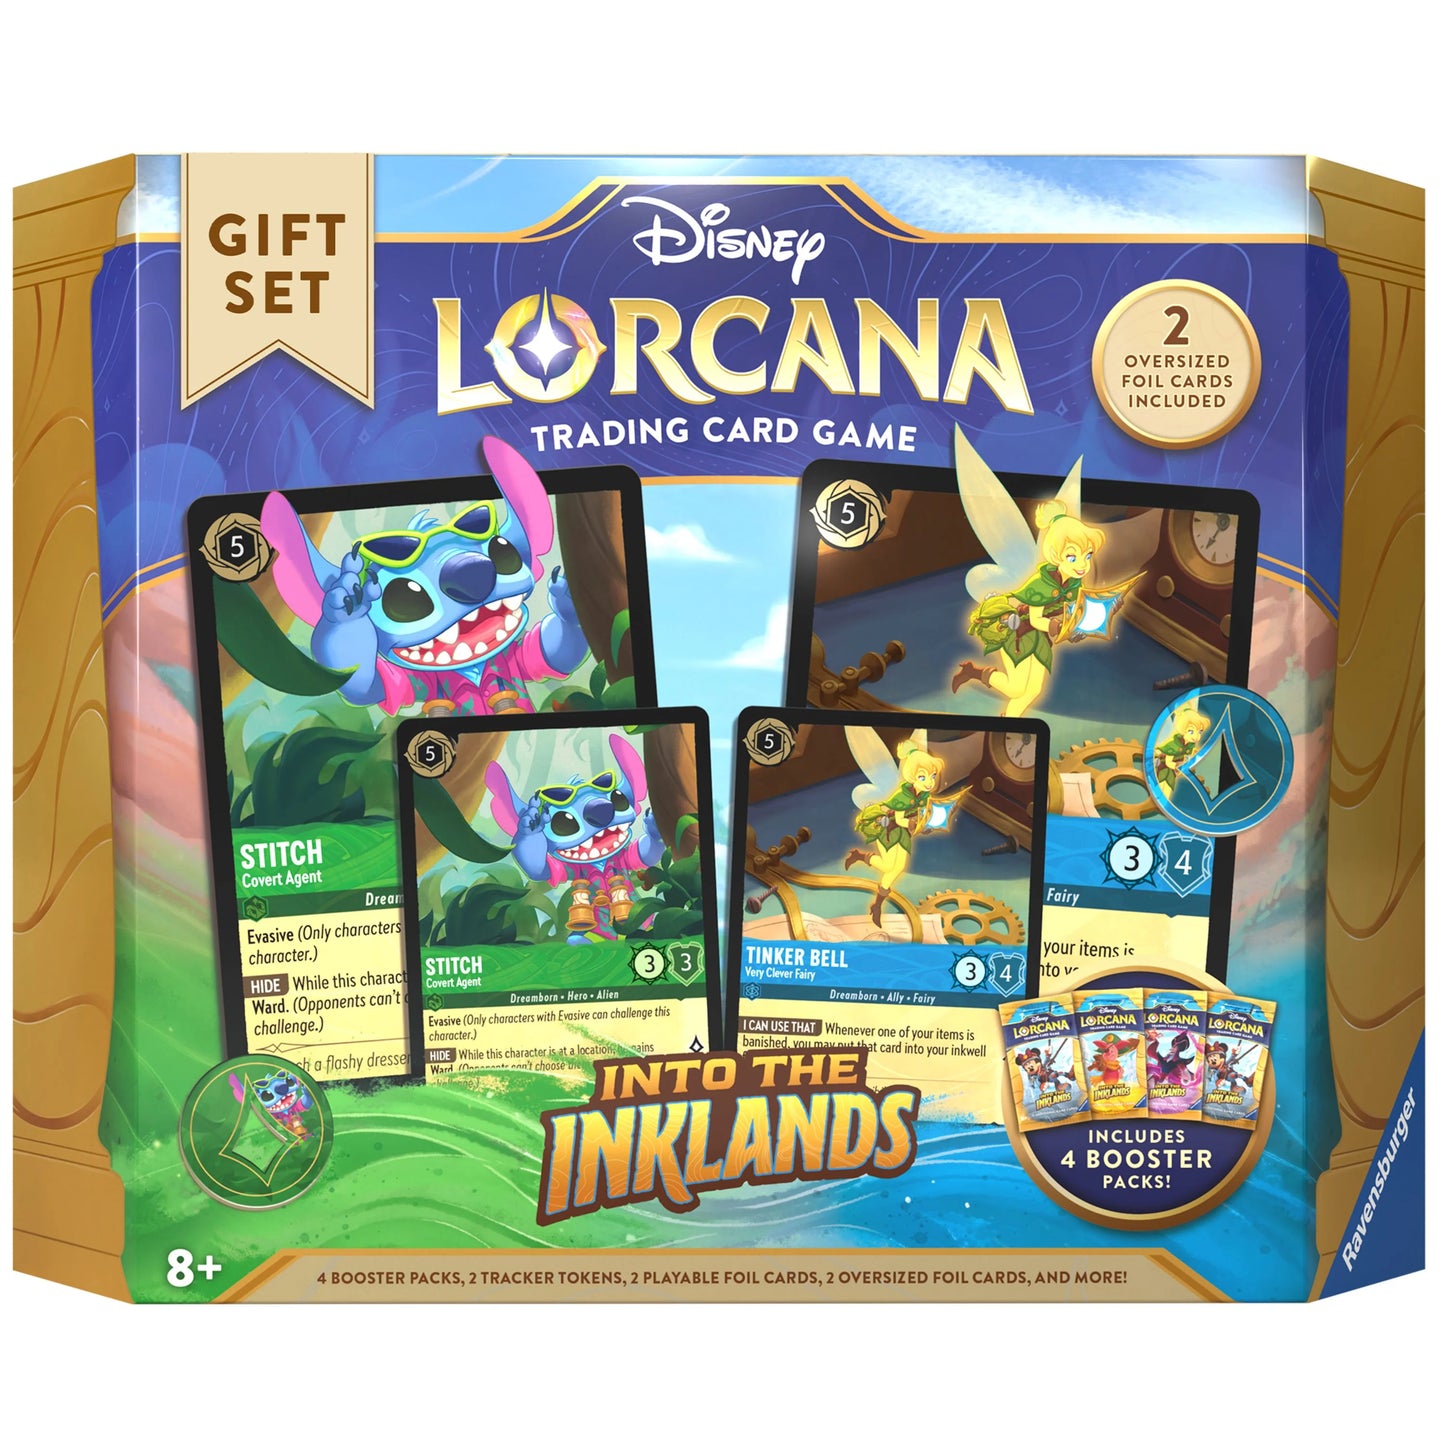 Lorcana Into the Inklands Gift Set PRE-ORDER